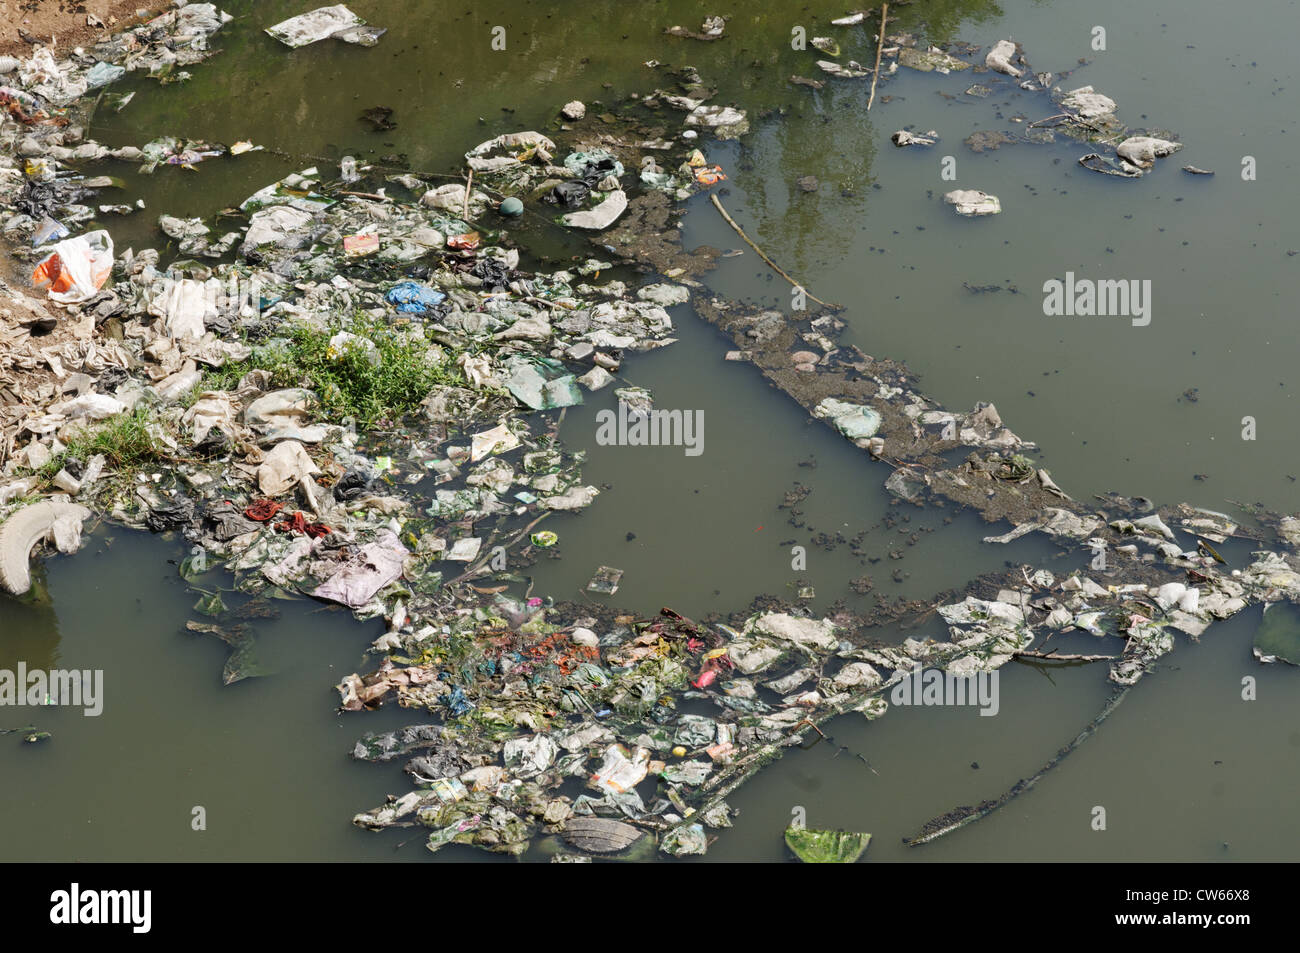 A filthy polluted river in India Stock Photo